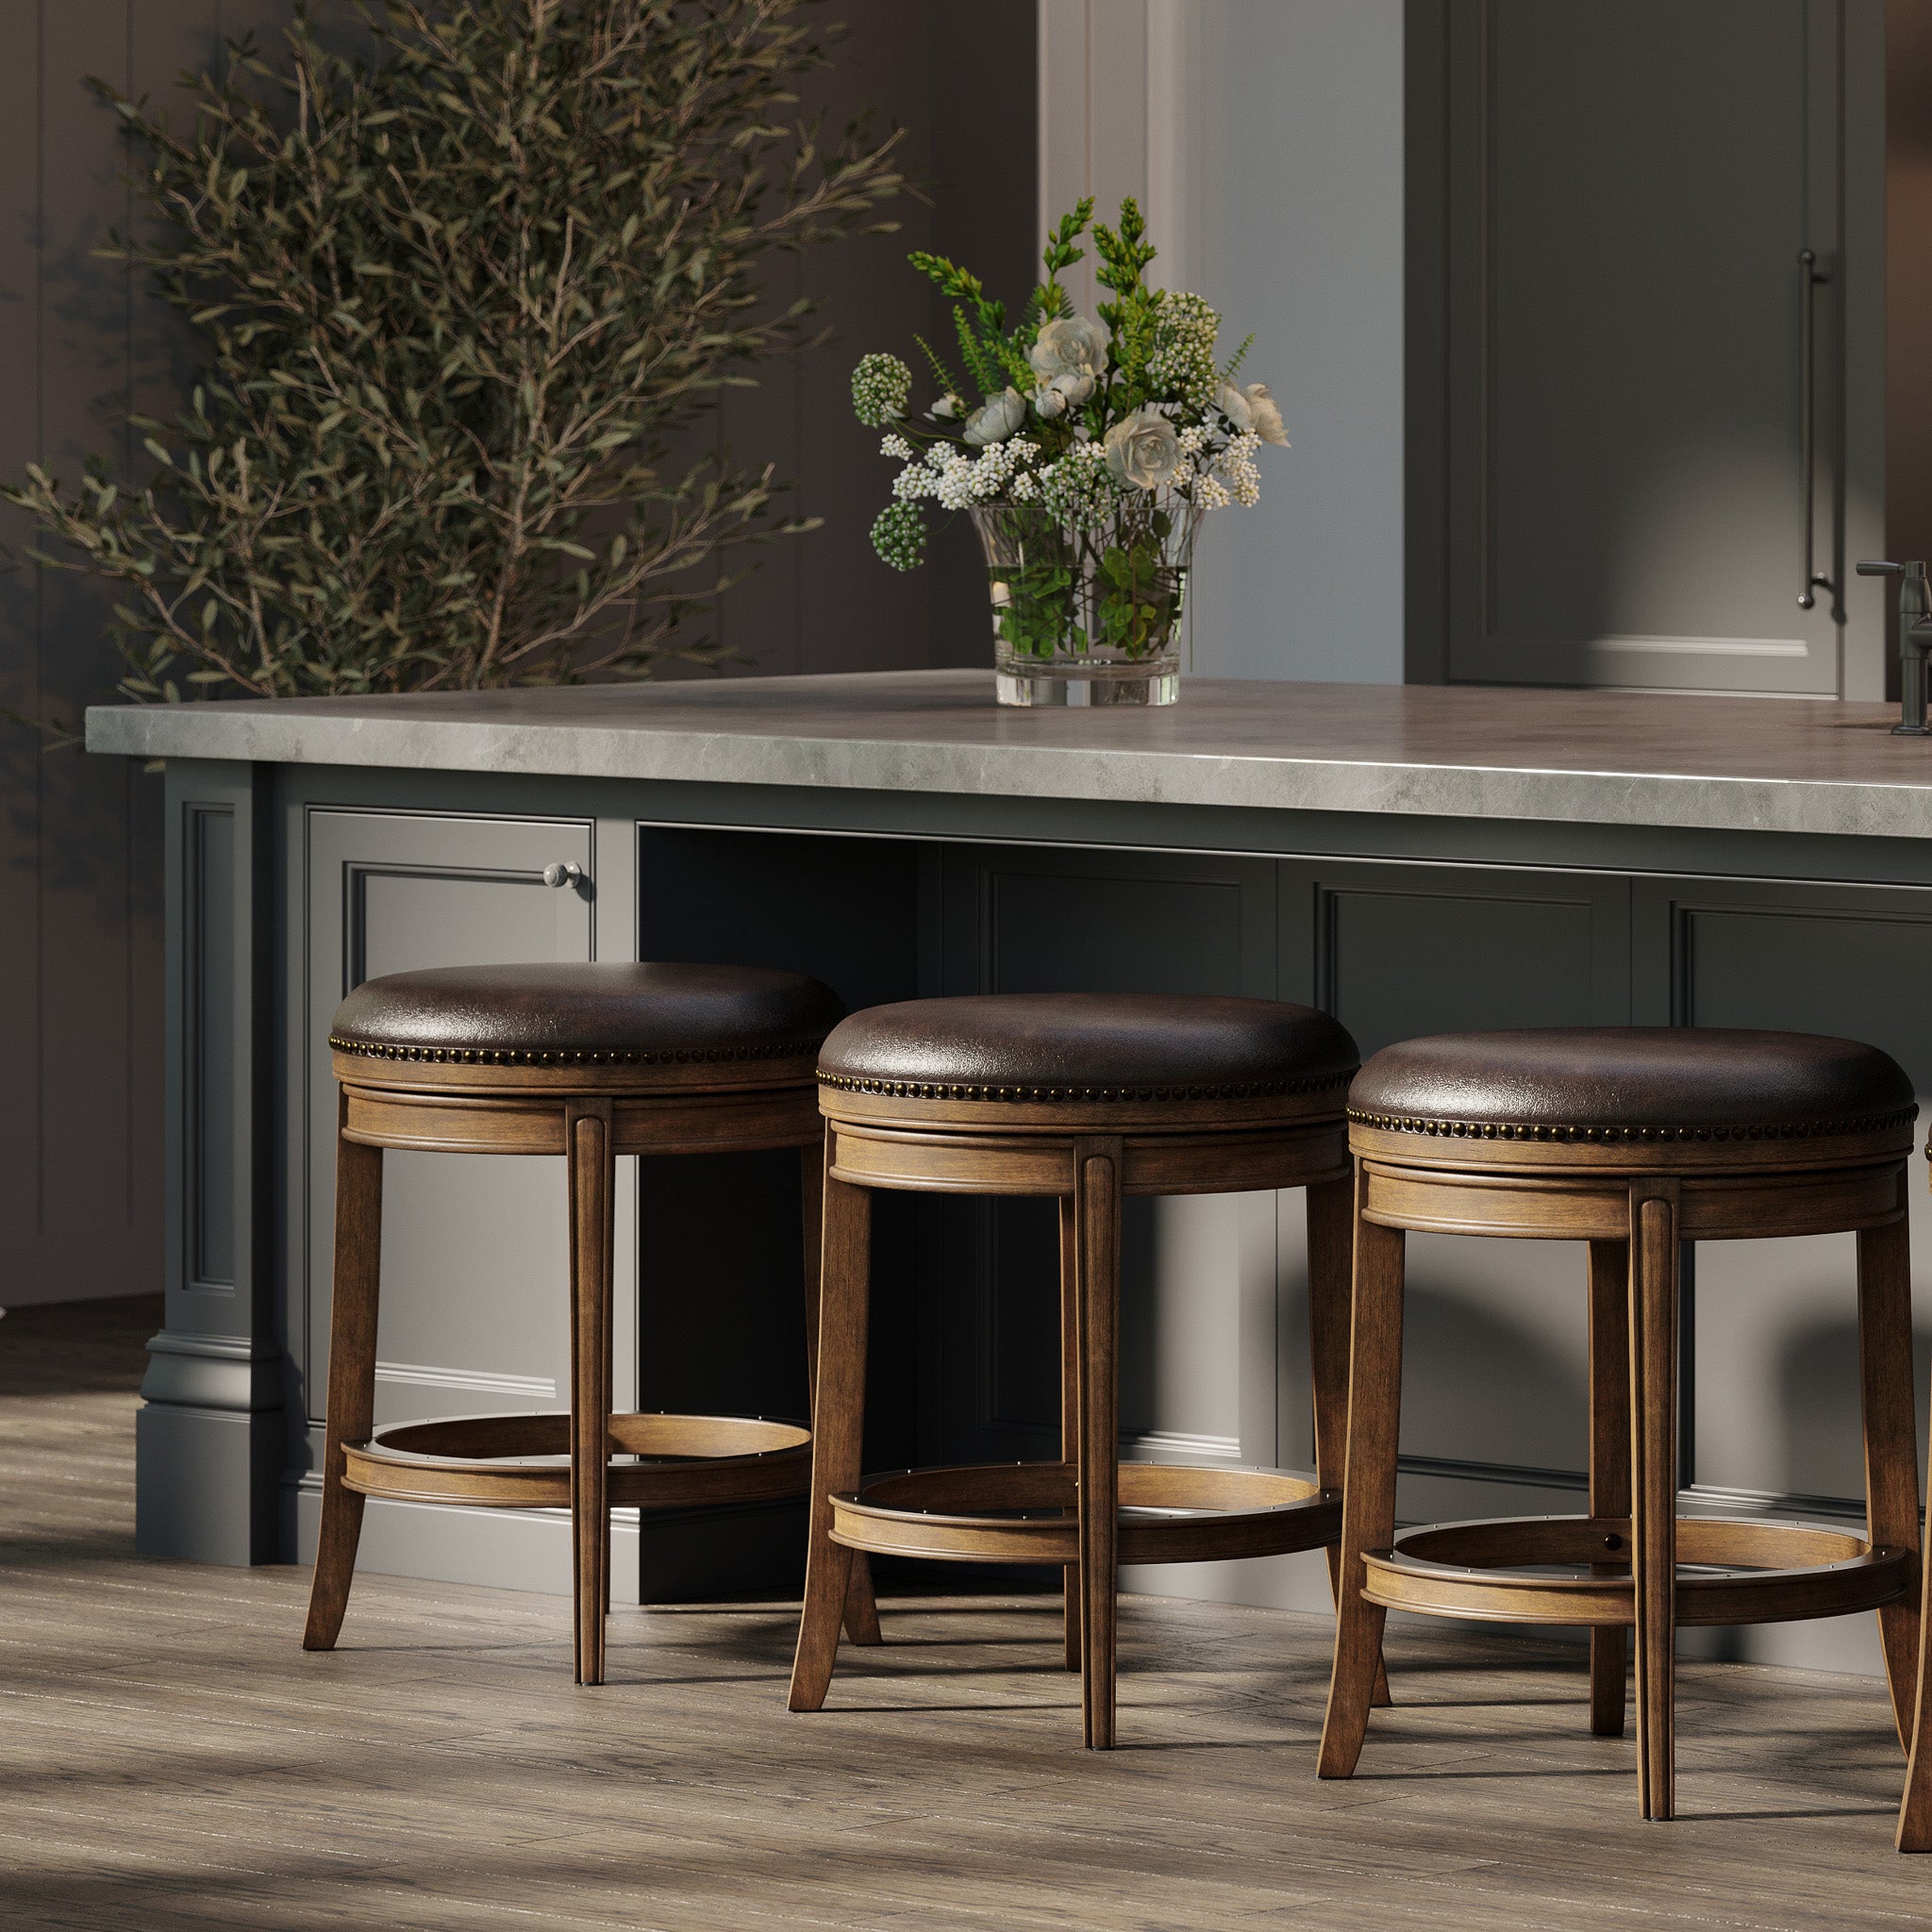 Alexander Backless Counter Stool in Walnut Finish with Marksman Saddle Vegan Leather in Stools by Maven Lane